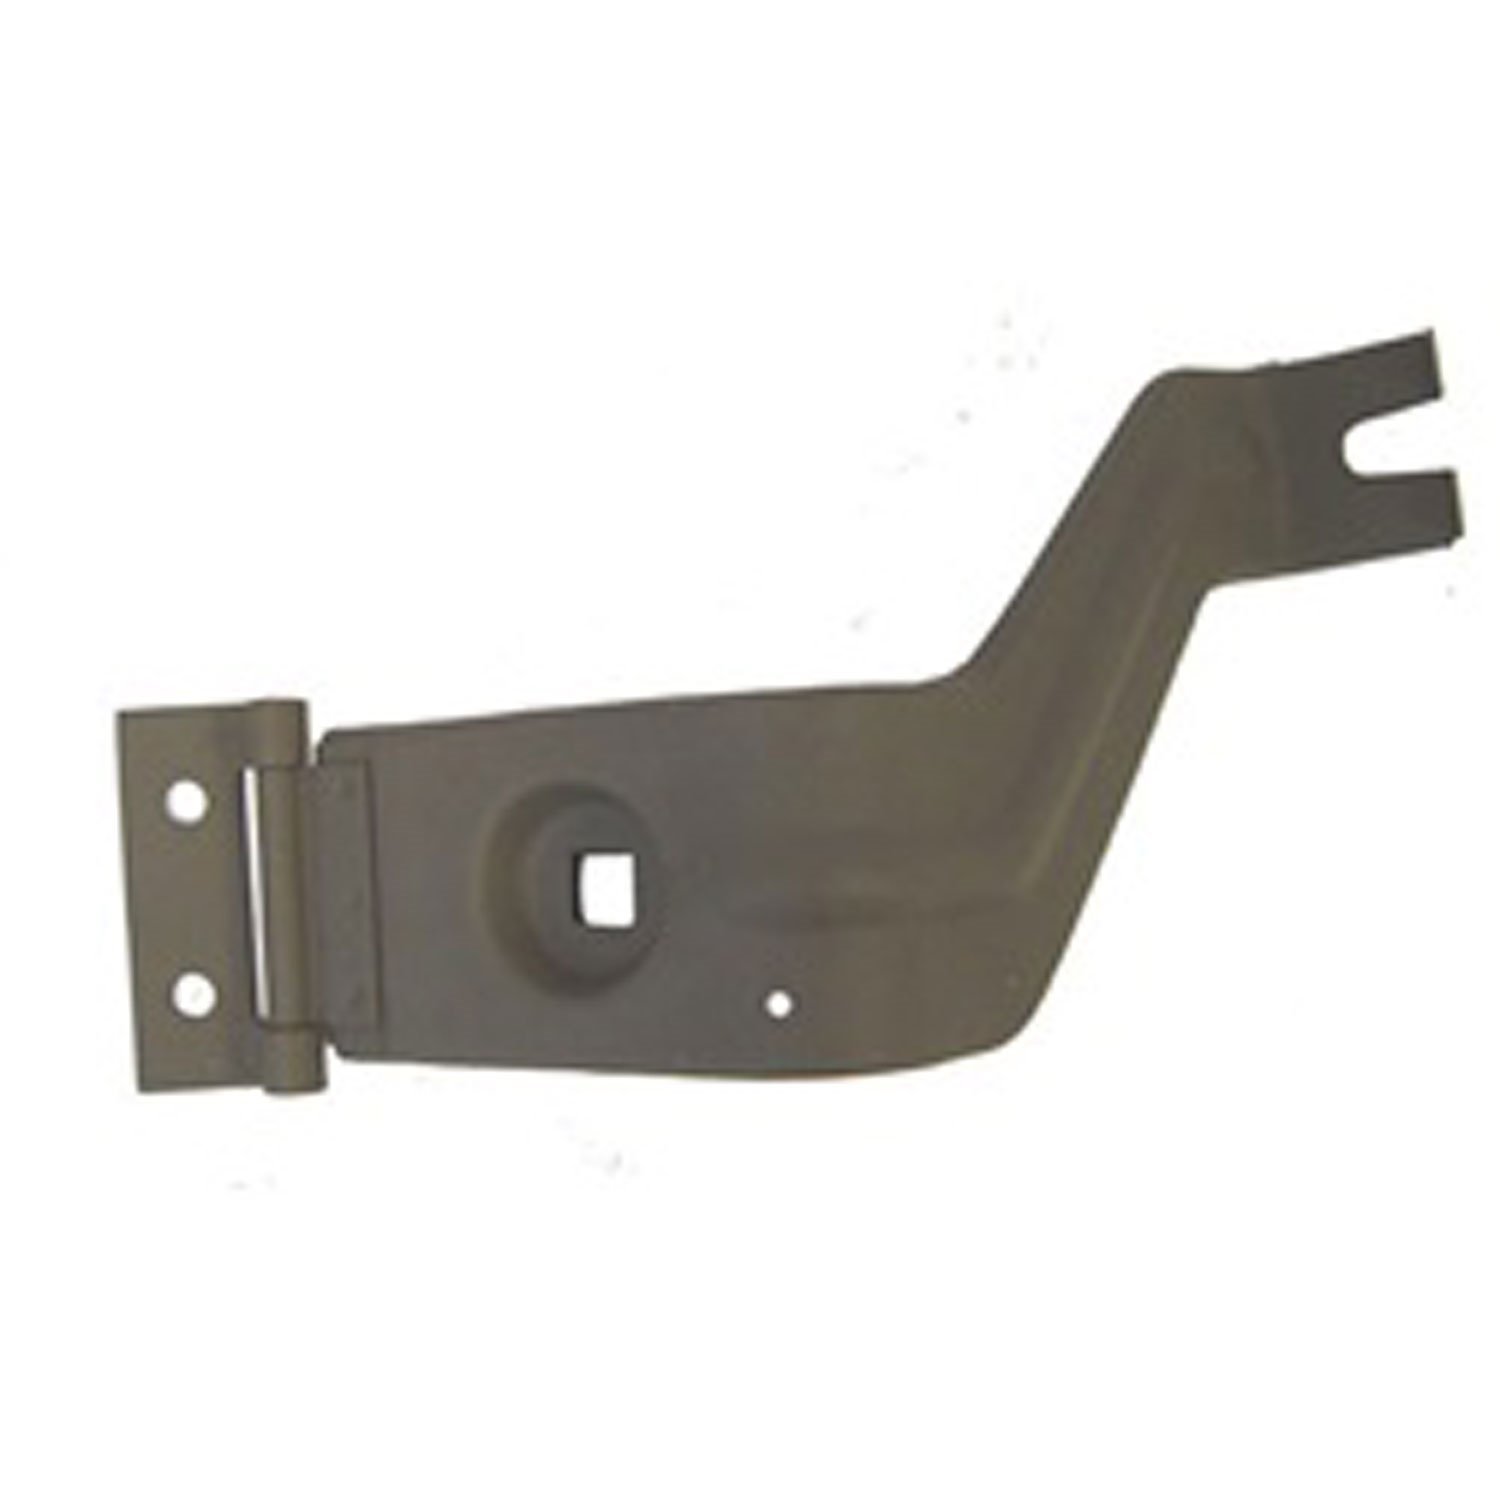 This reproduction headlight housing bracket from Omix-ADA fits